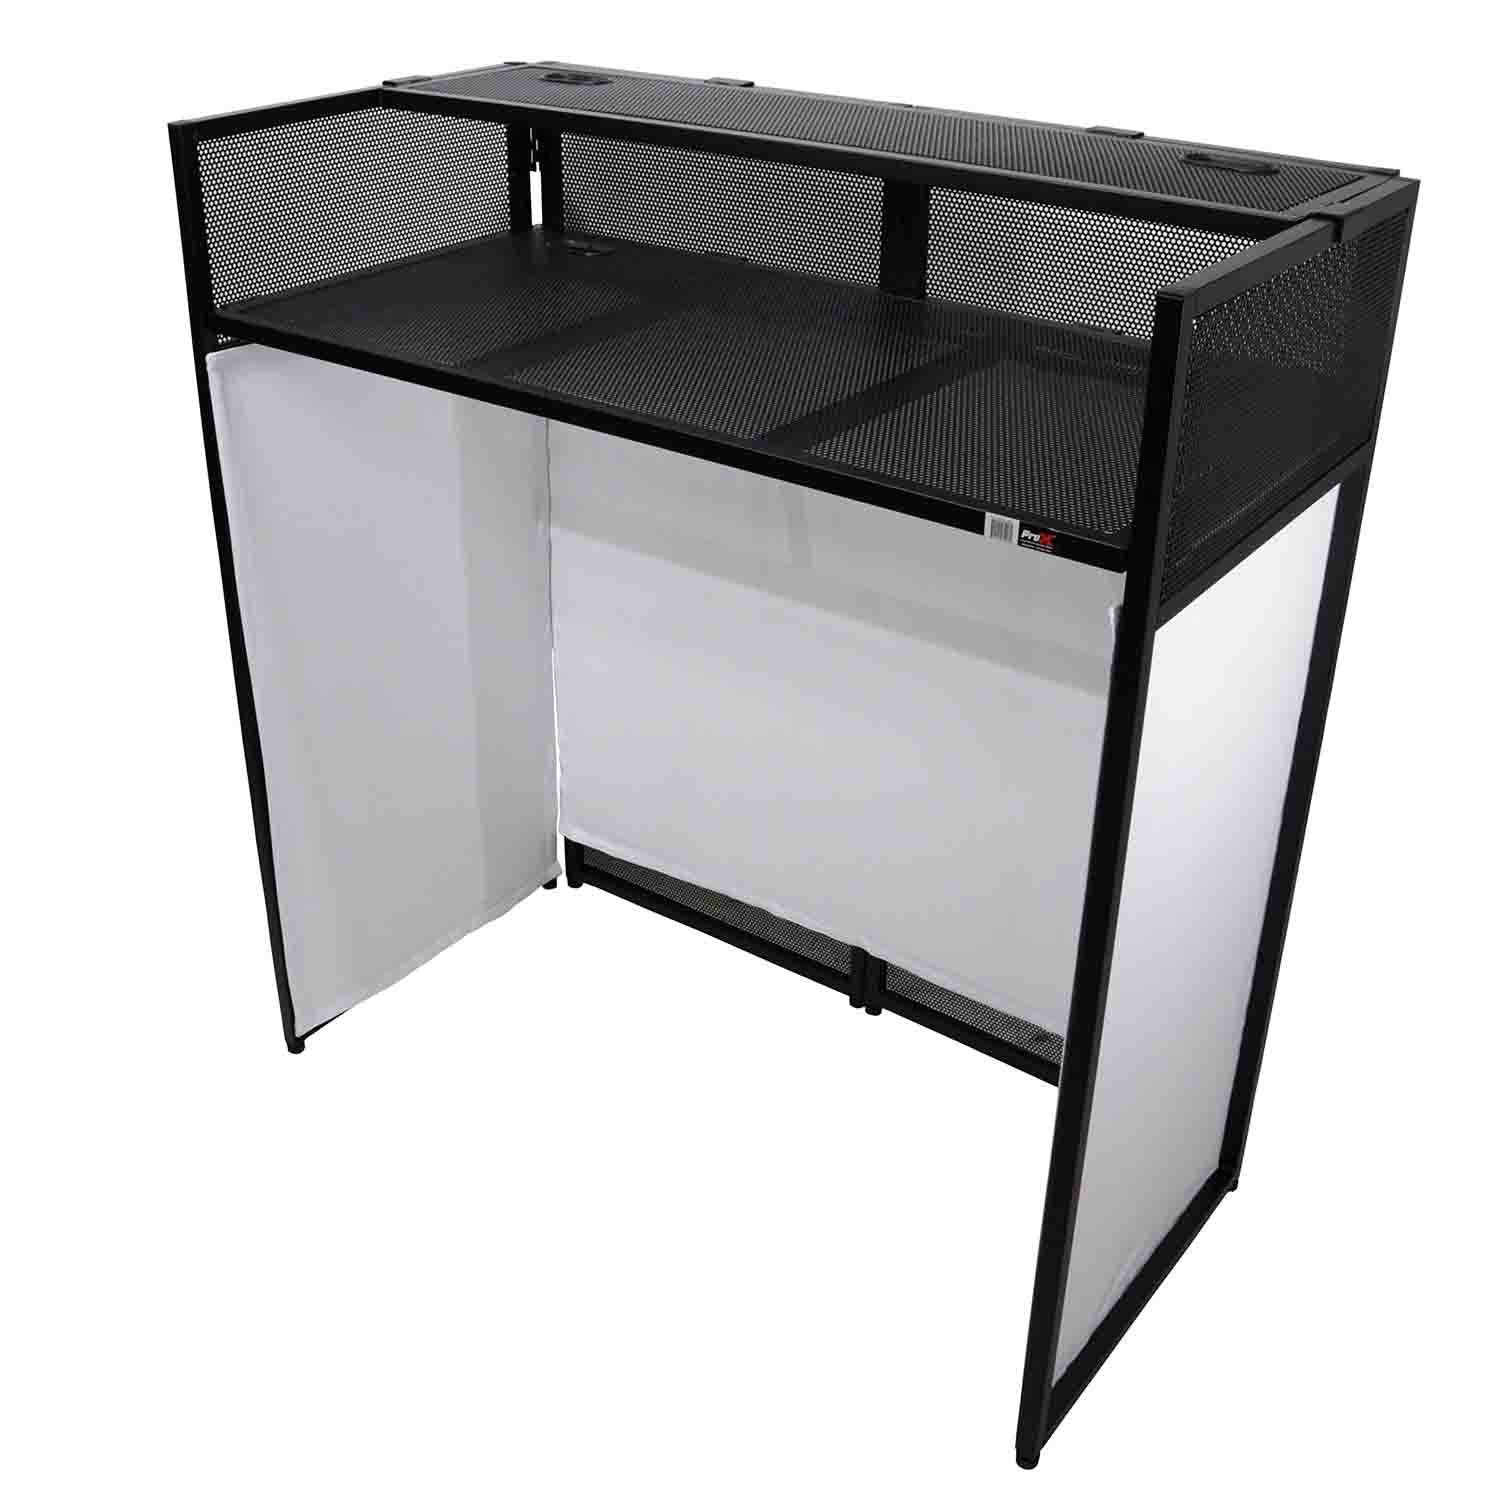 ProX XF-VISTA BL MK2 VISTA DJ Booth Facade Table Station with White/Black Scrim kit and Padded Travel Bag - Hollywood DJ